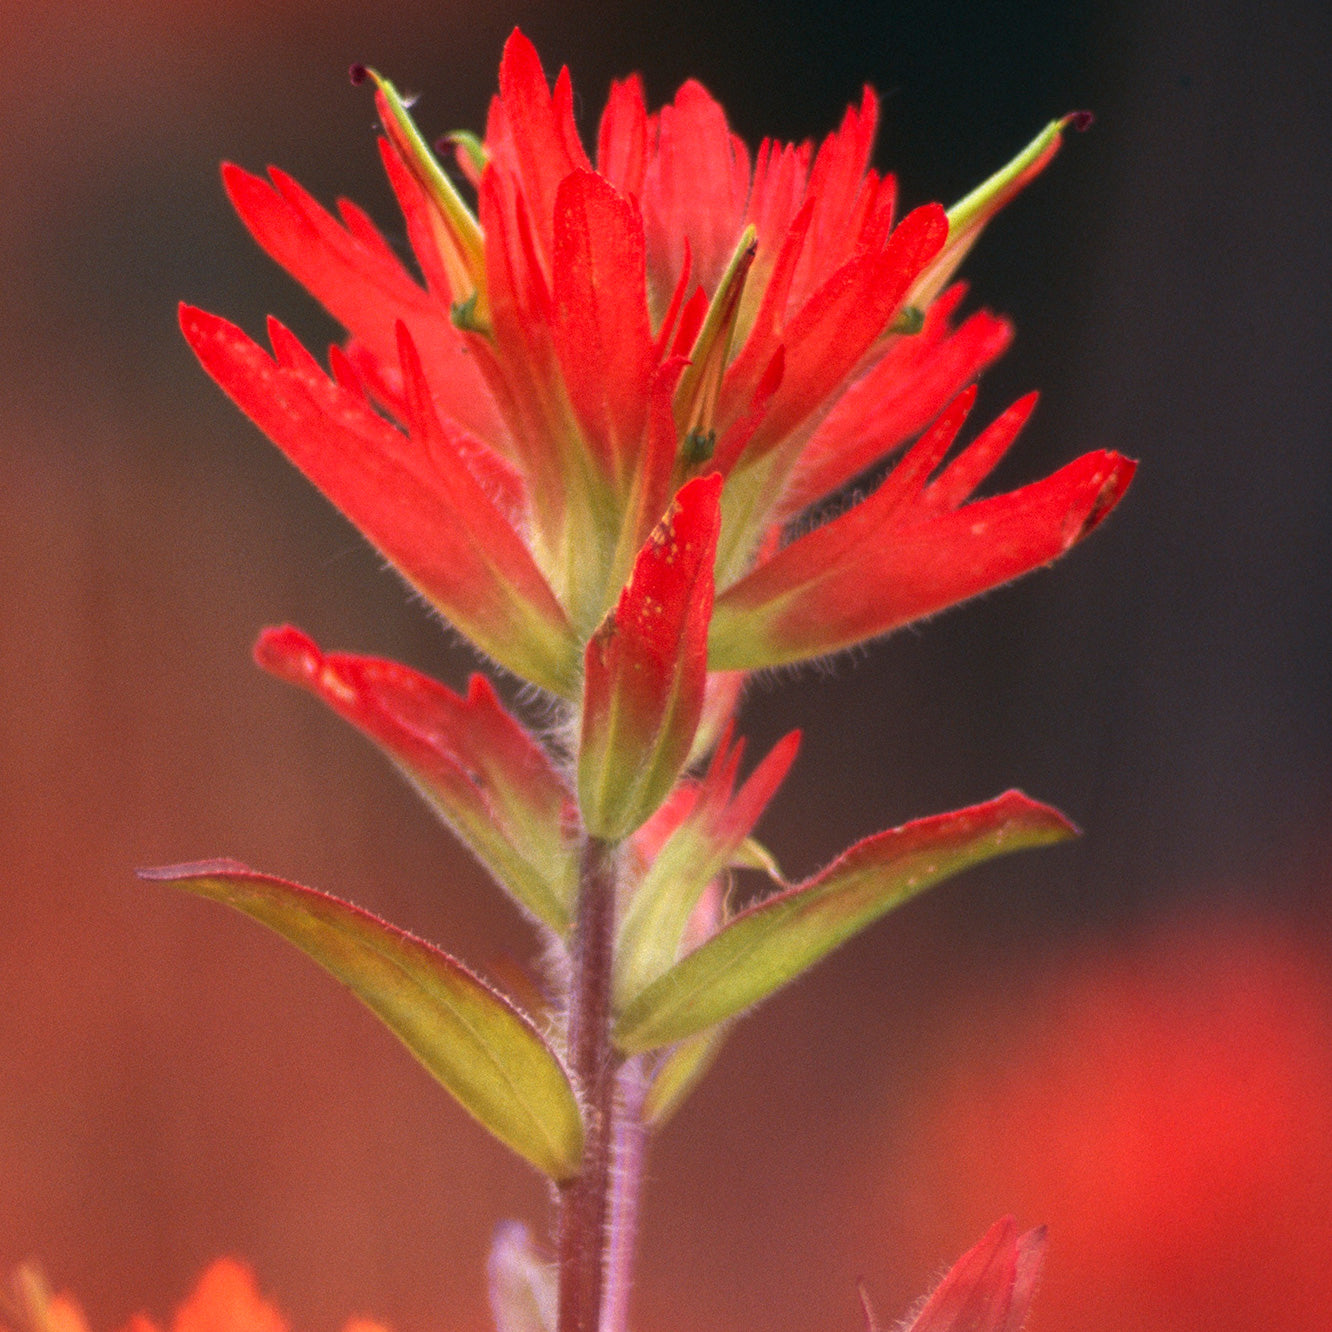 Paintbrush - New Mexico Wildflower Seeds